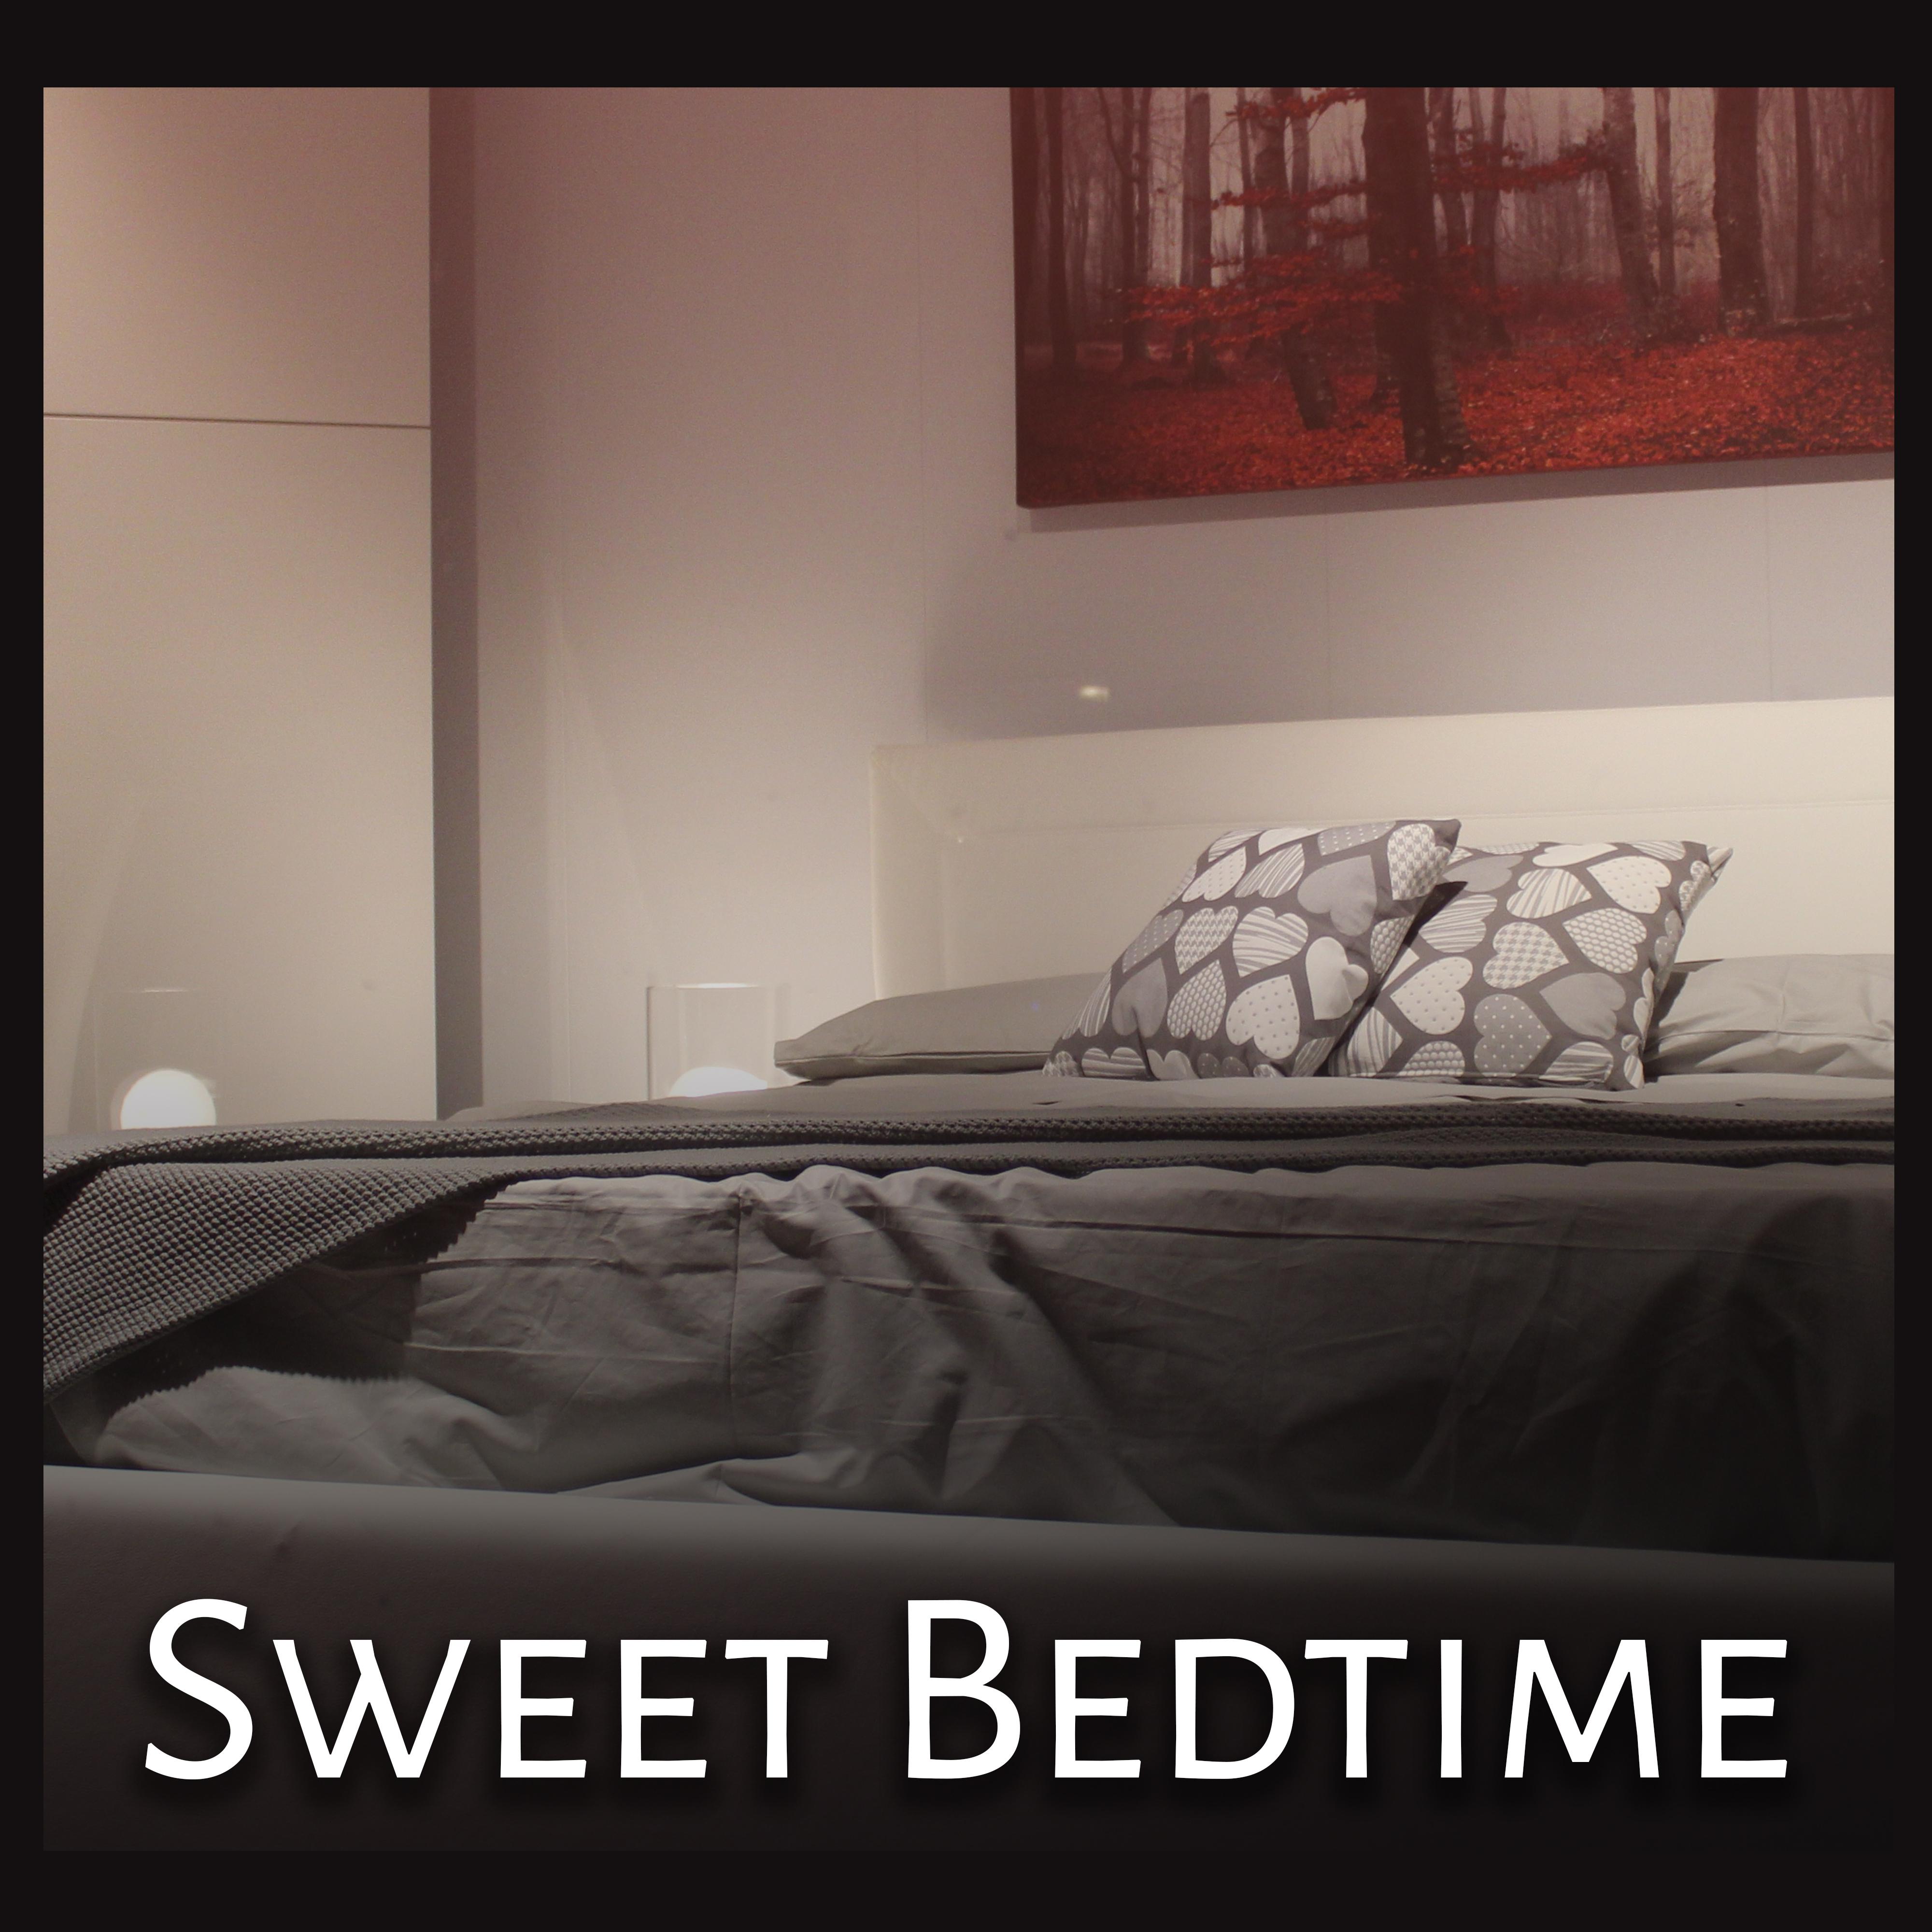 Sweet Bedtime – Soft Music for Sleep, Relaxation, Peaceful Lullabies, Relaxing Therapy to Bed, Calm Down, Restful Sleep, Soothing Sounds